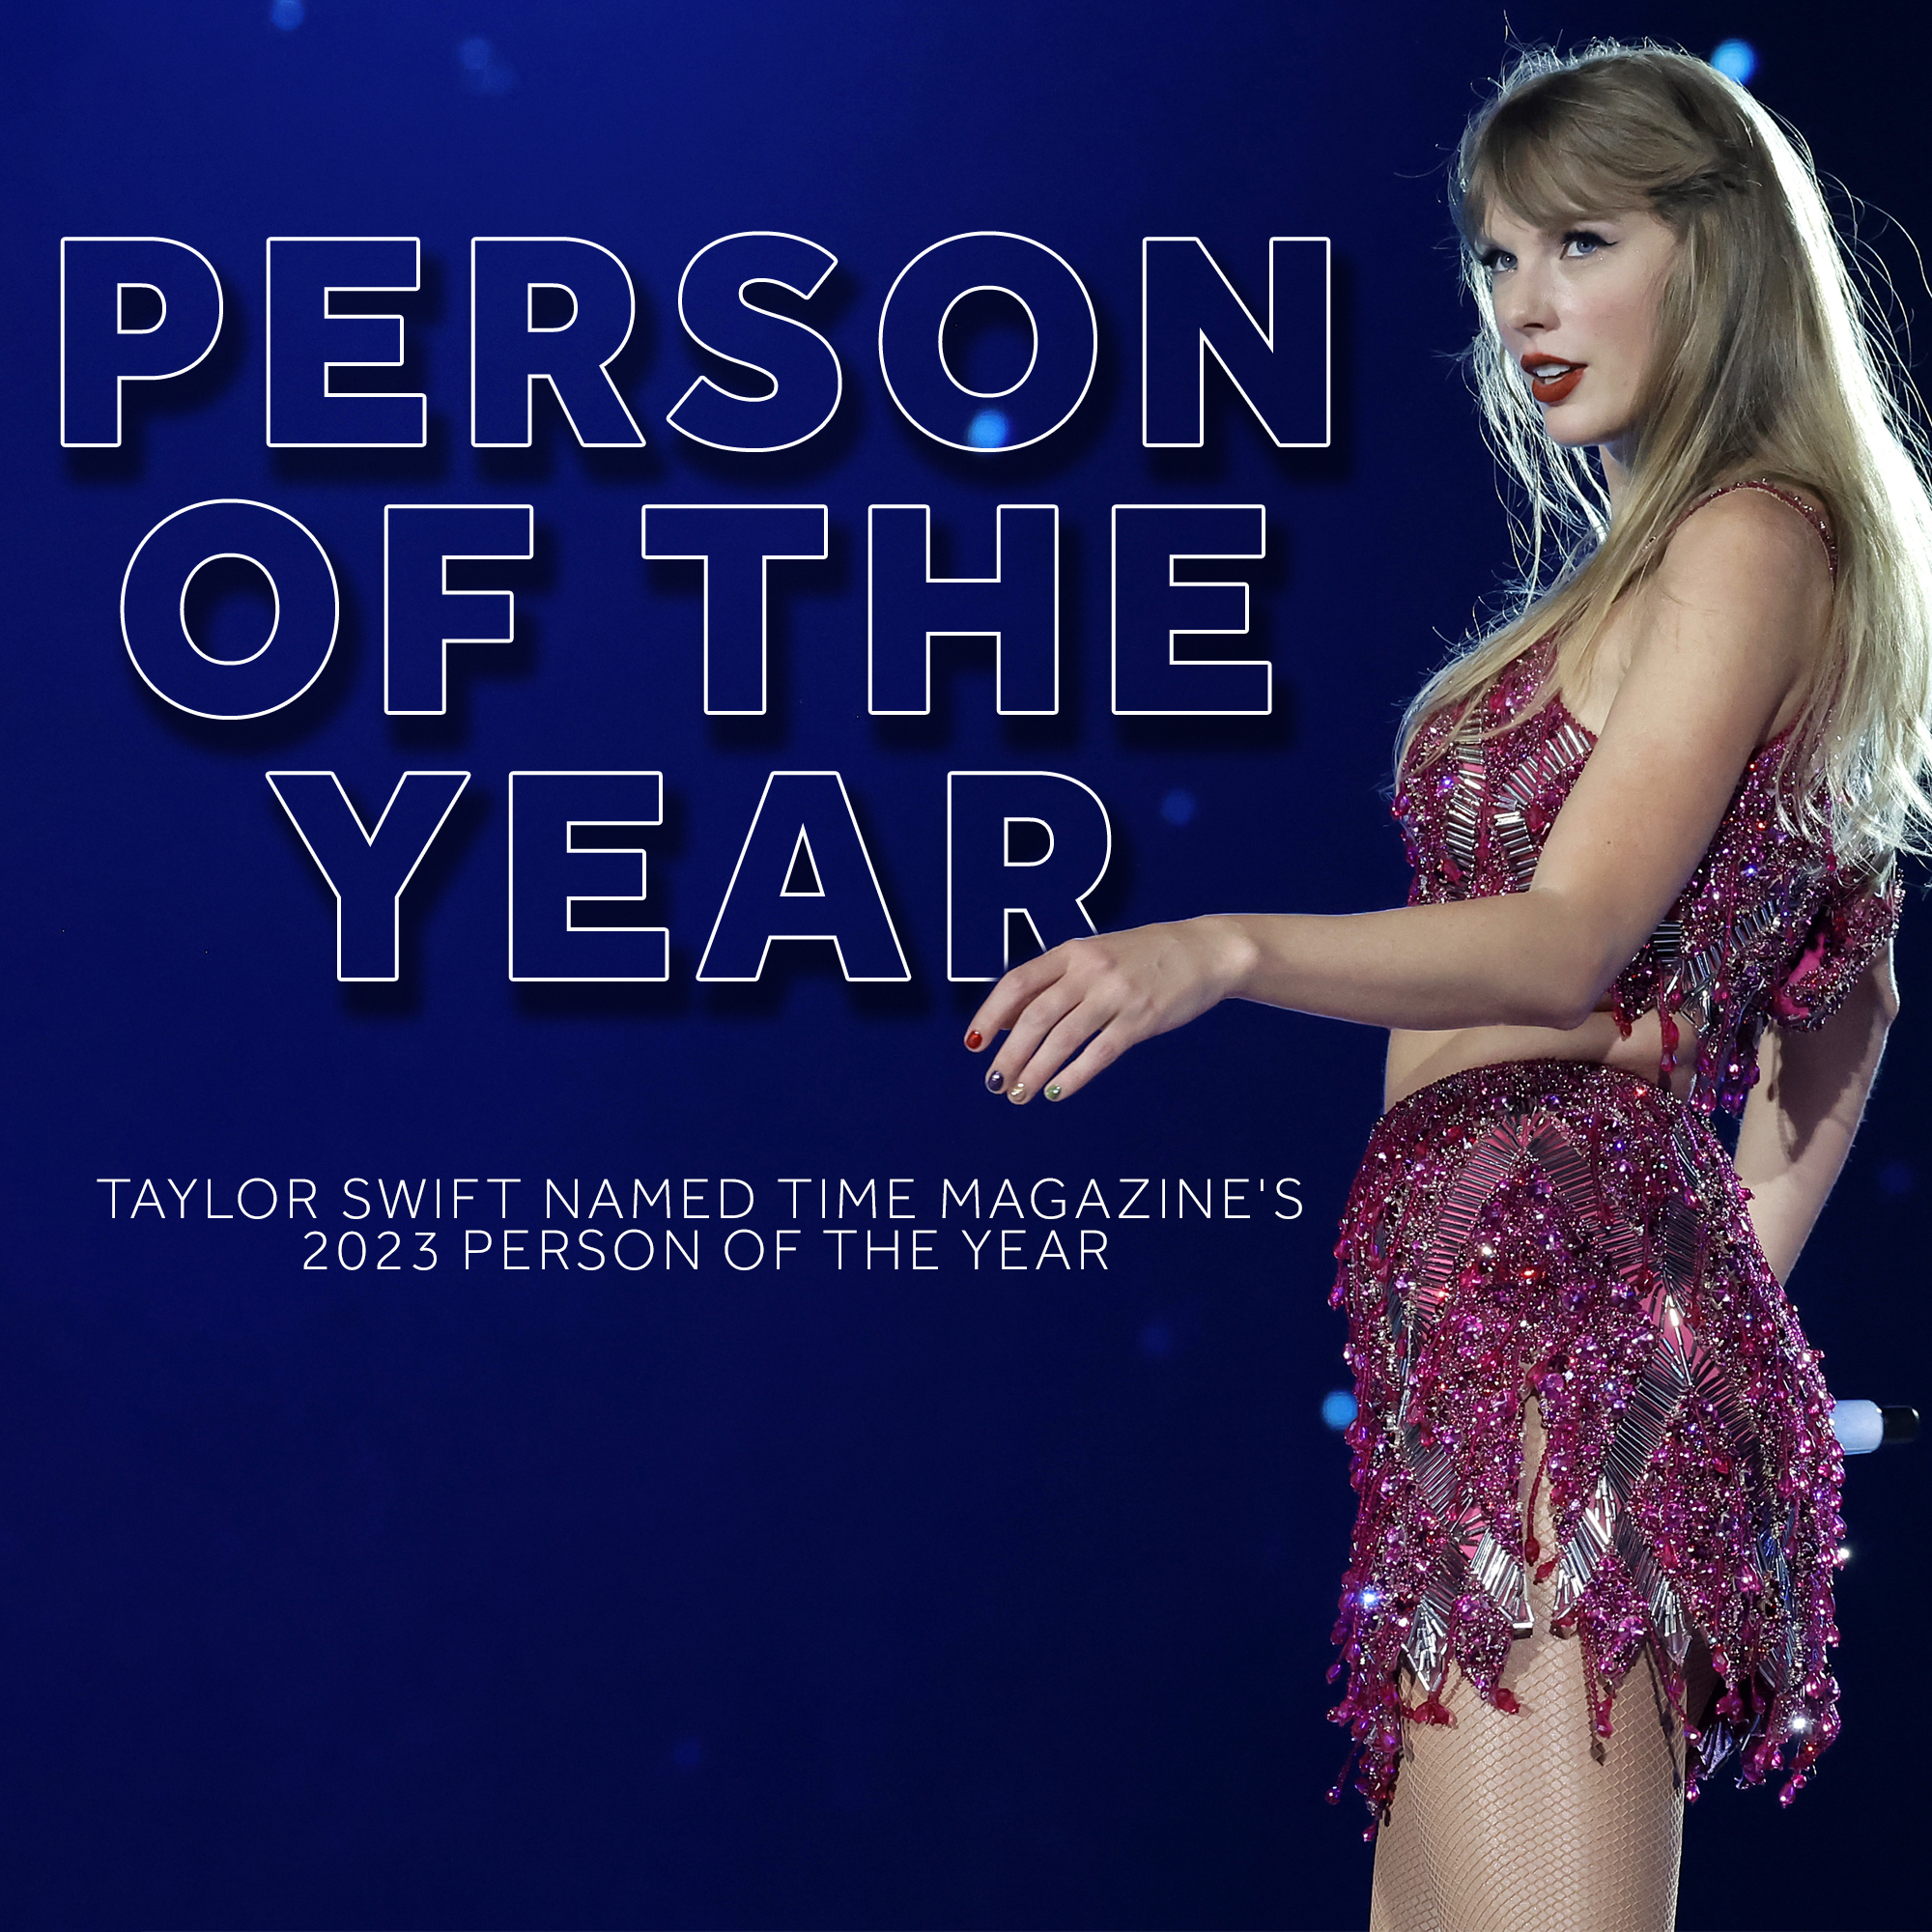 Taylor Swift named Time Magazine Person of the Year